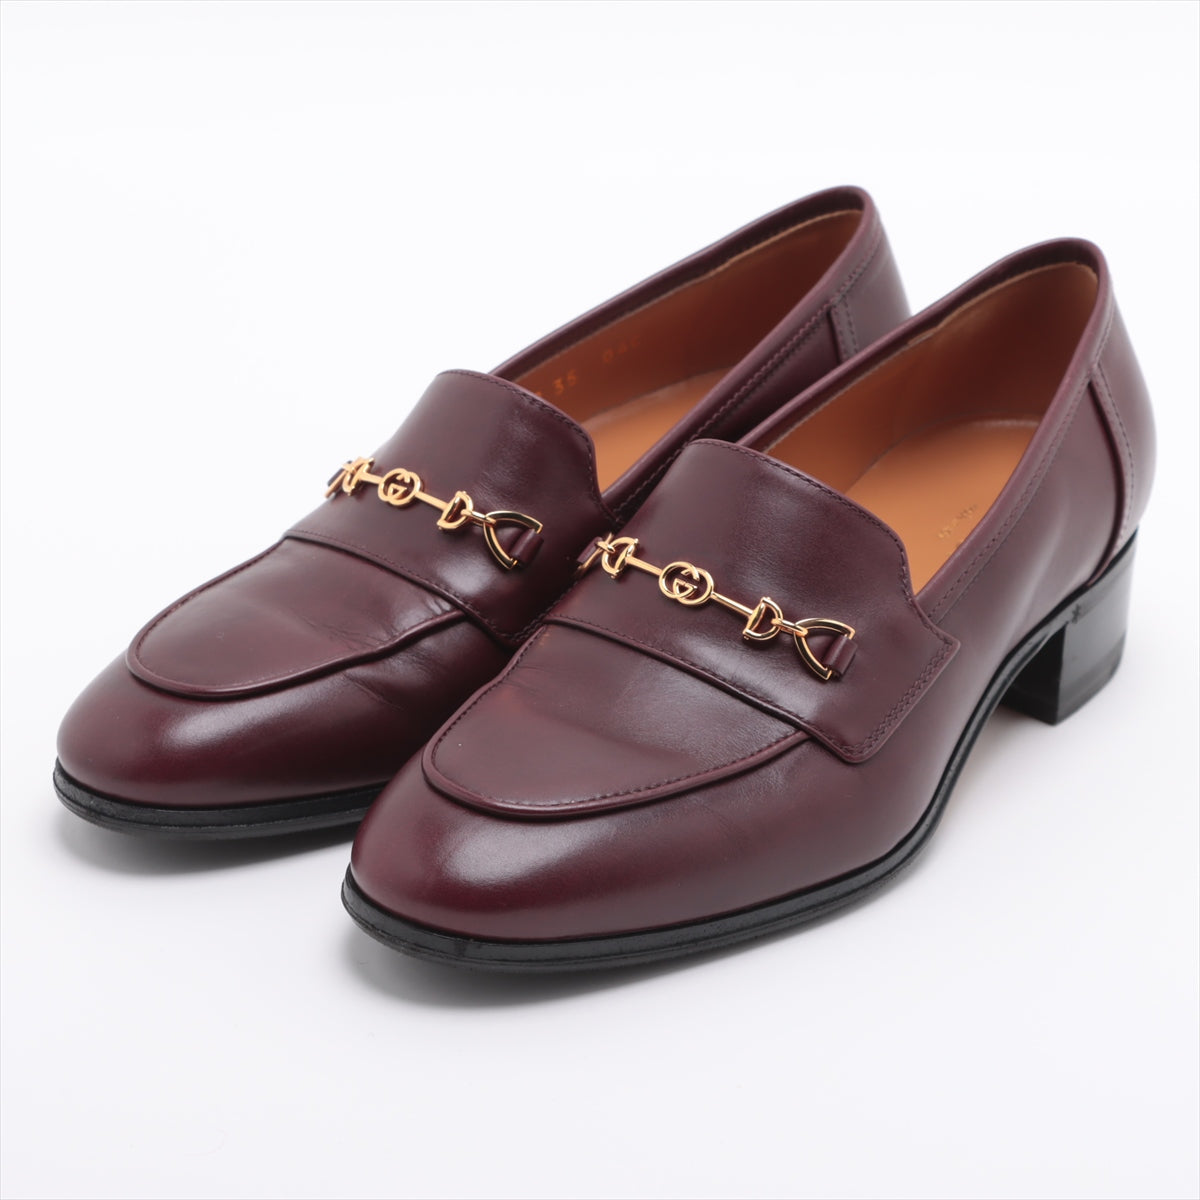 Gucci Leather Loafer 35 Ladies' Burgundy 658268 Lift repair